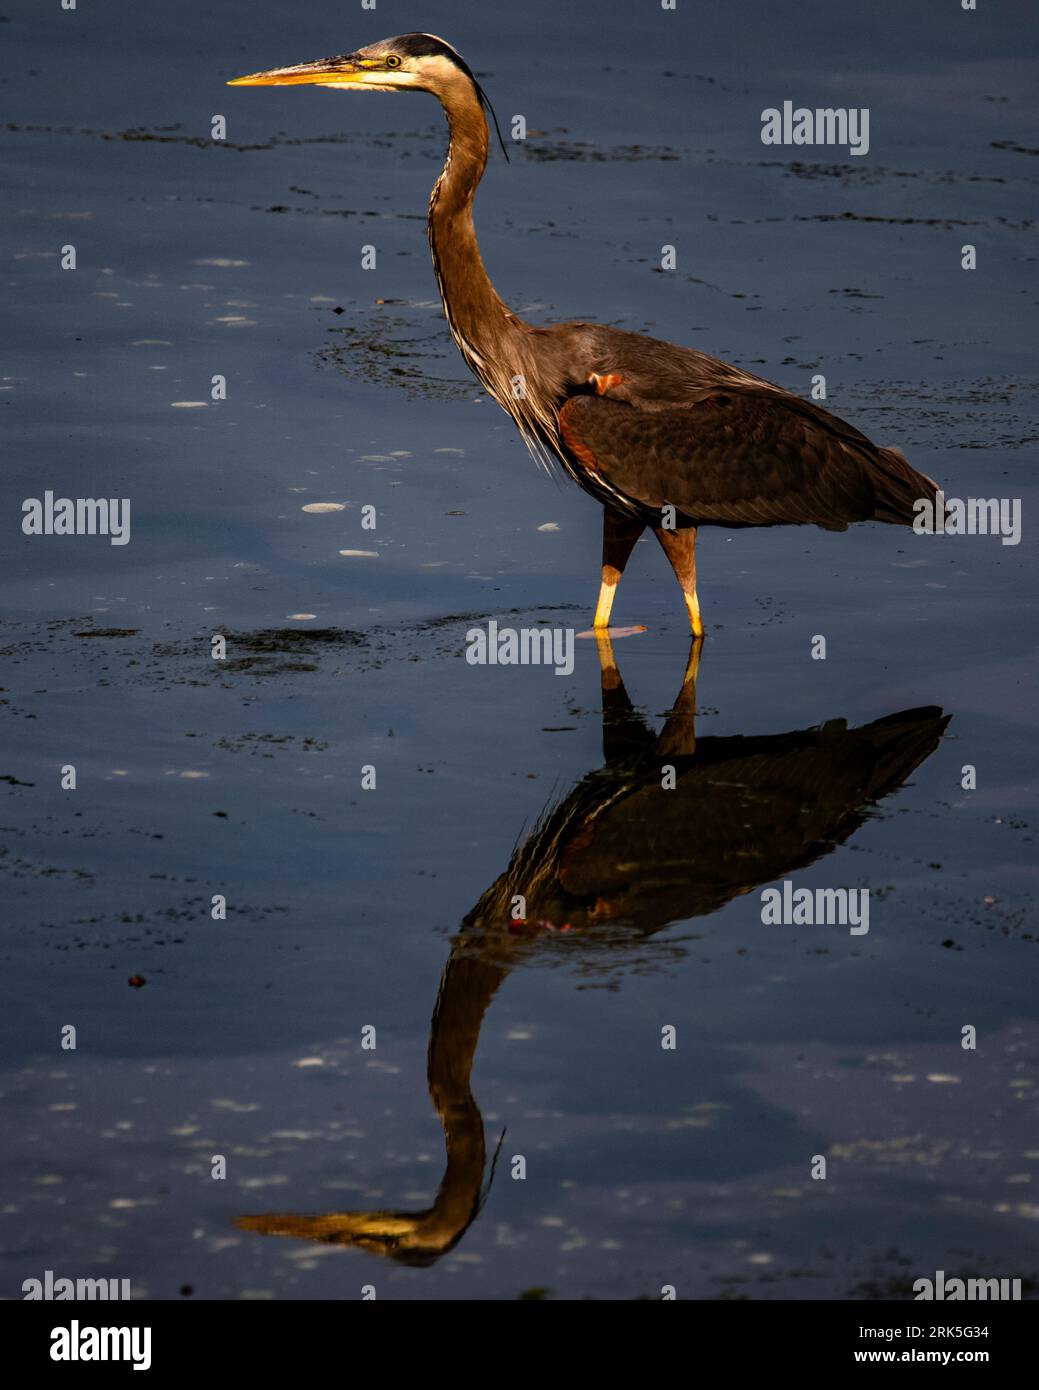 A majestic Great Blue Heron (Ardea herodias)  atop the tranquil waters of a lake Stock Photo